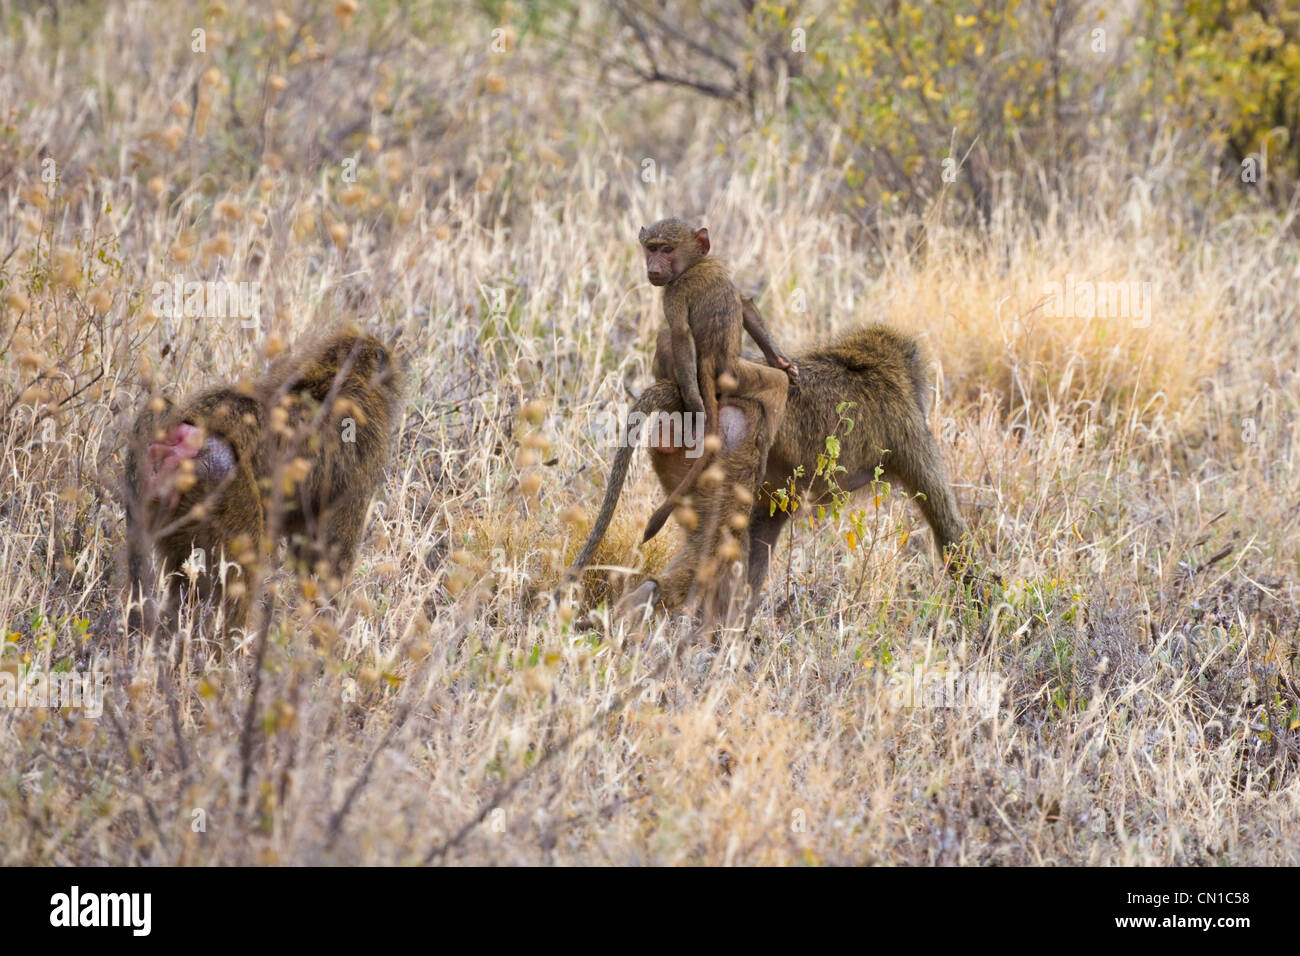 Olive Baboon (Papio anubis), mother with baby in the grass, Samburu National Reserve, Kenya Stock Photo